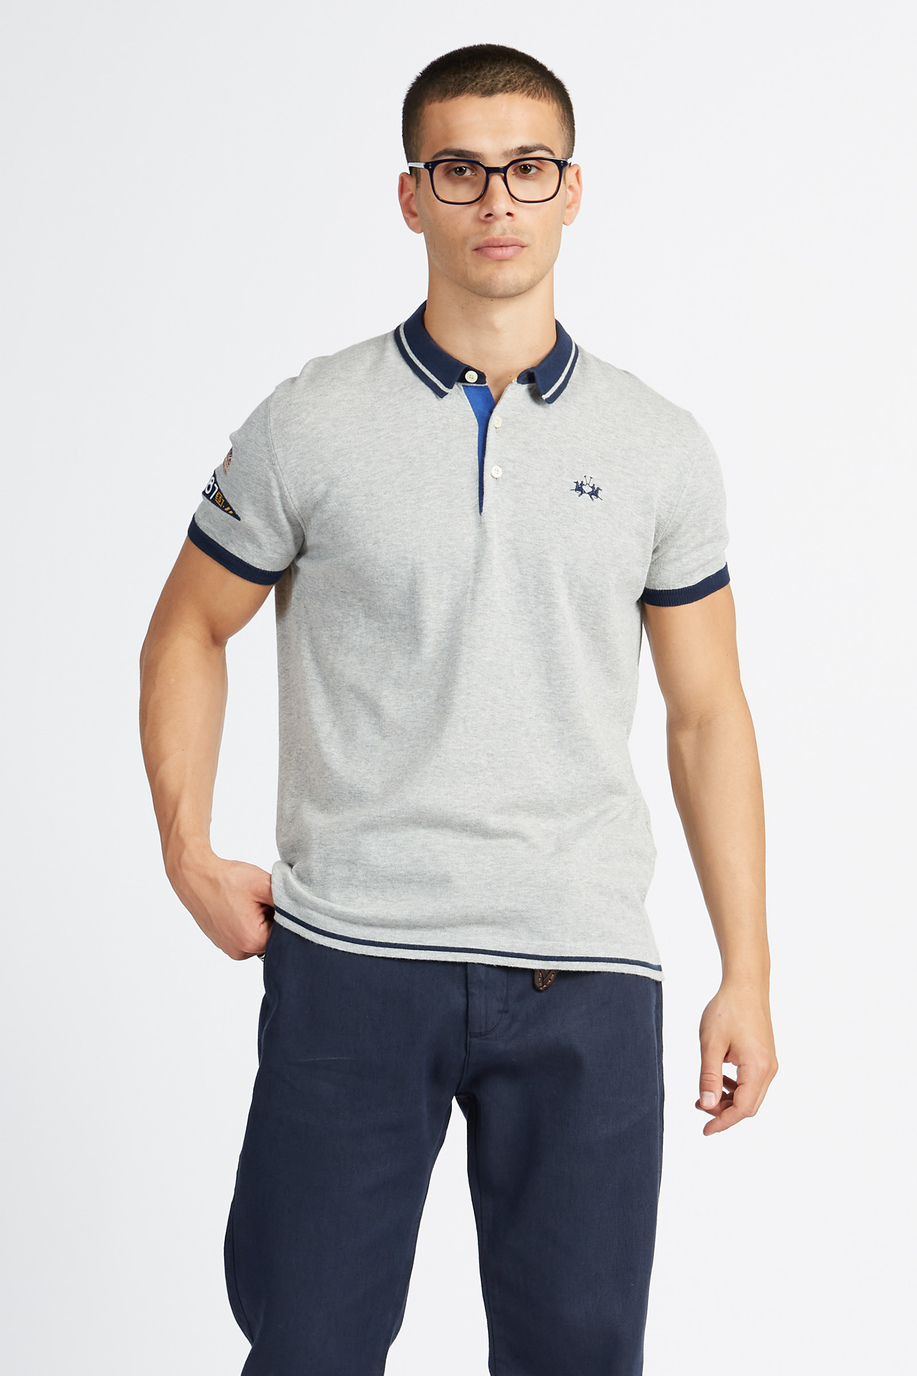 Short-sleeved men's tricot sweater in solid color Polo Academy - Victorin - Preview  | La Martina - Official Online Shop